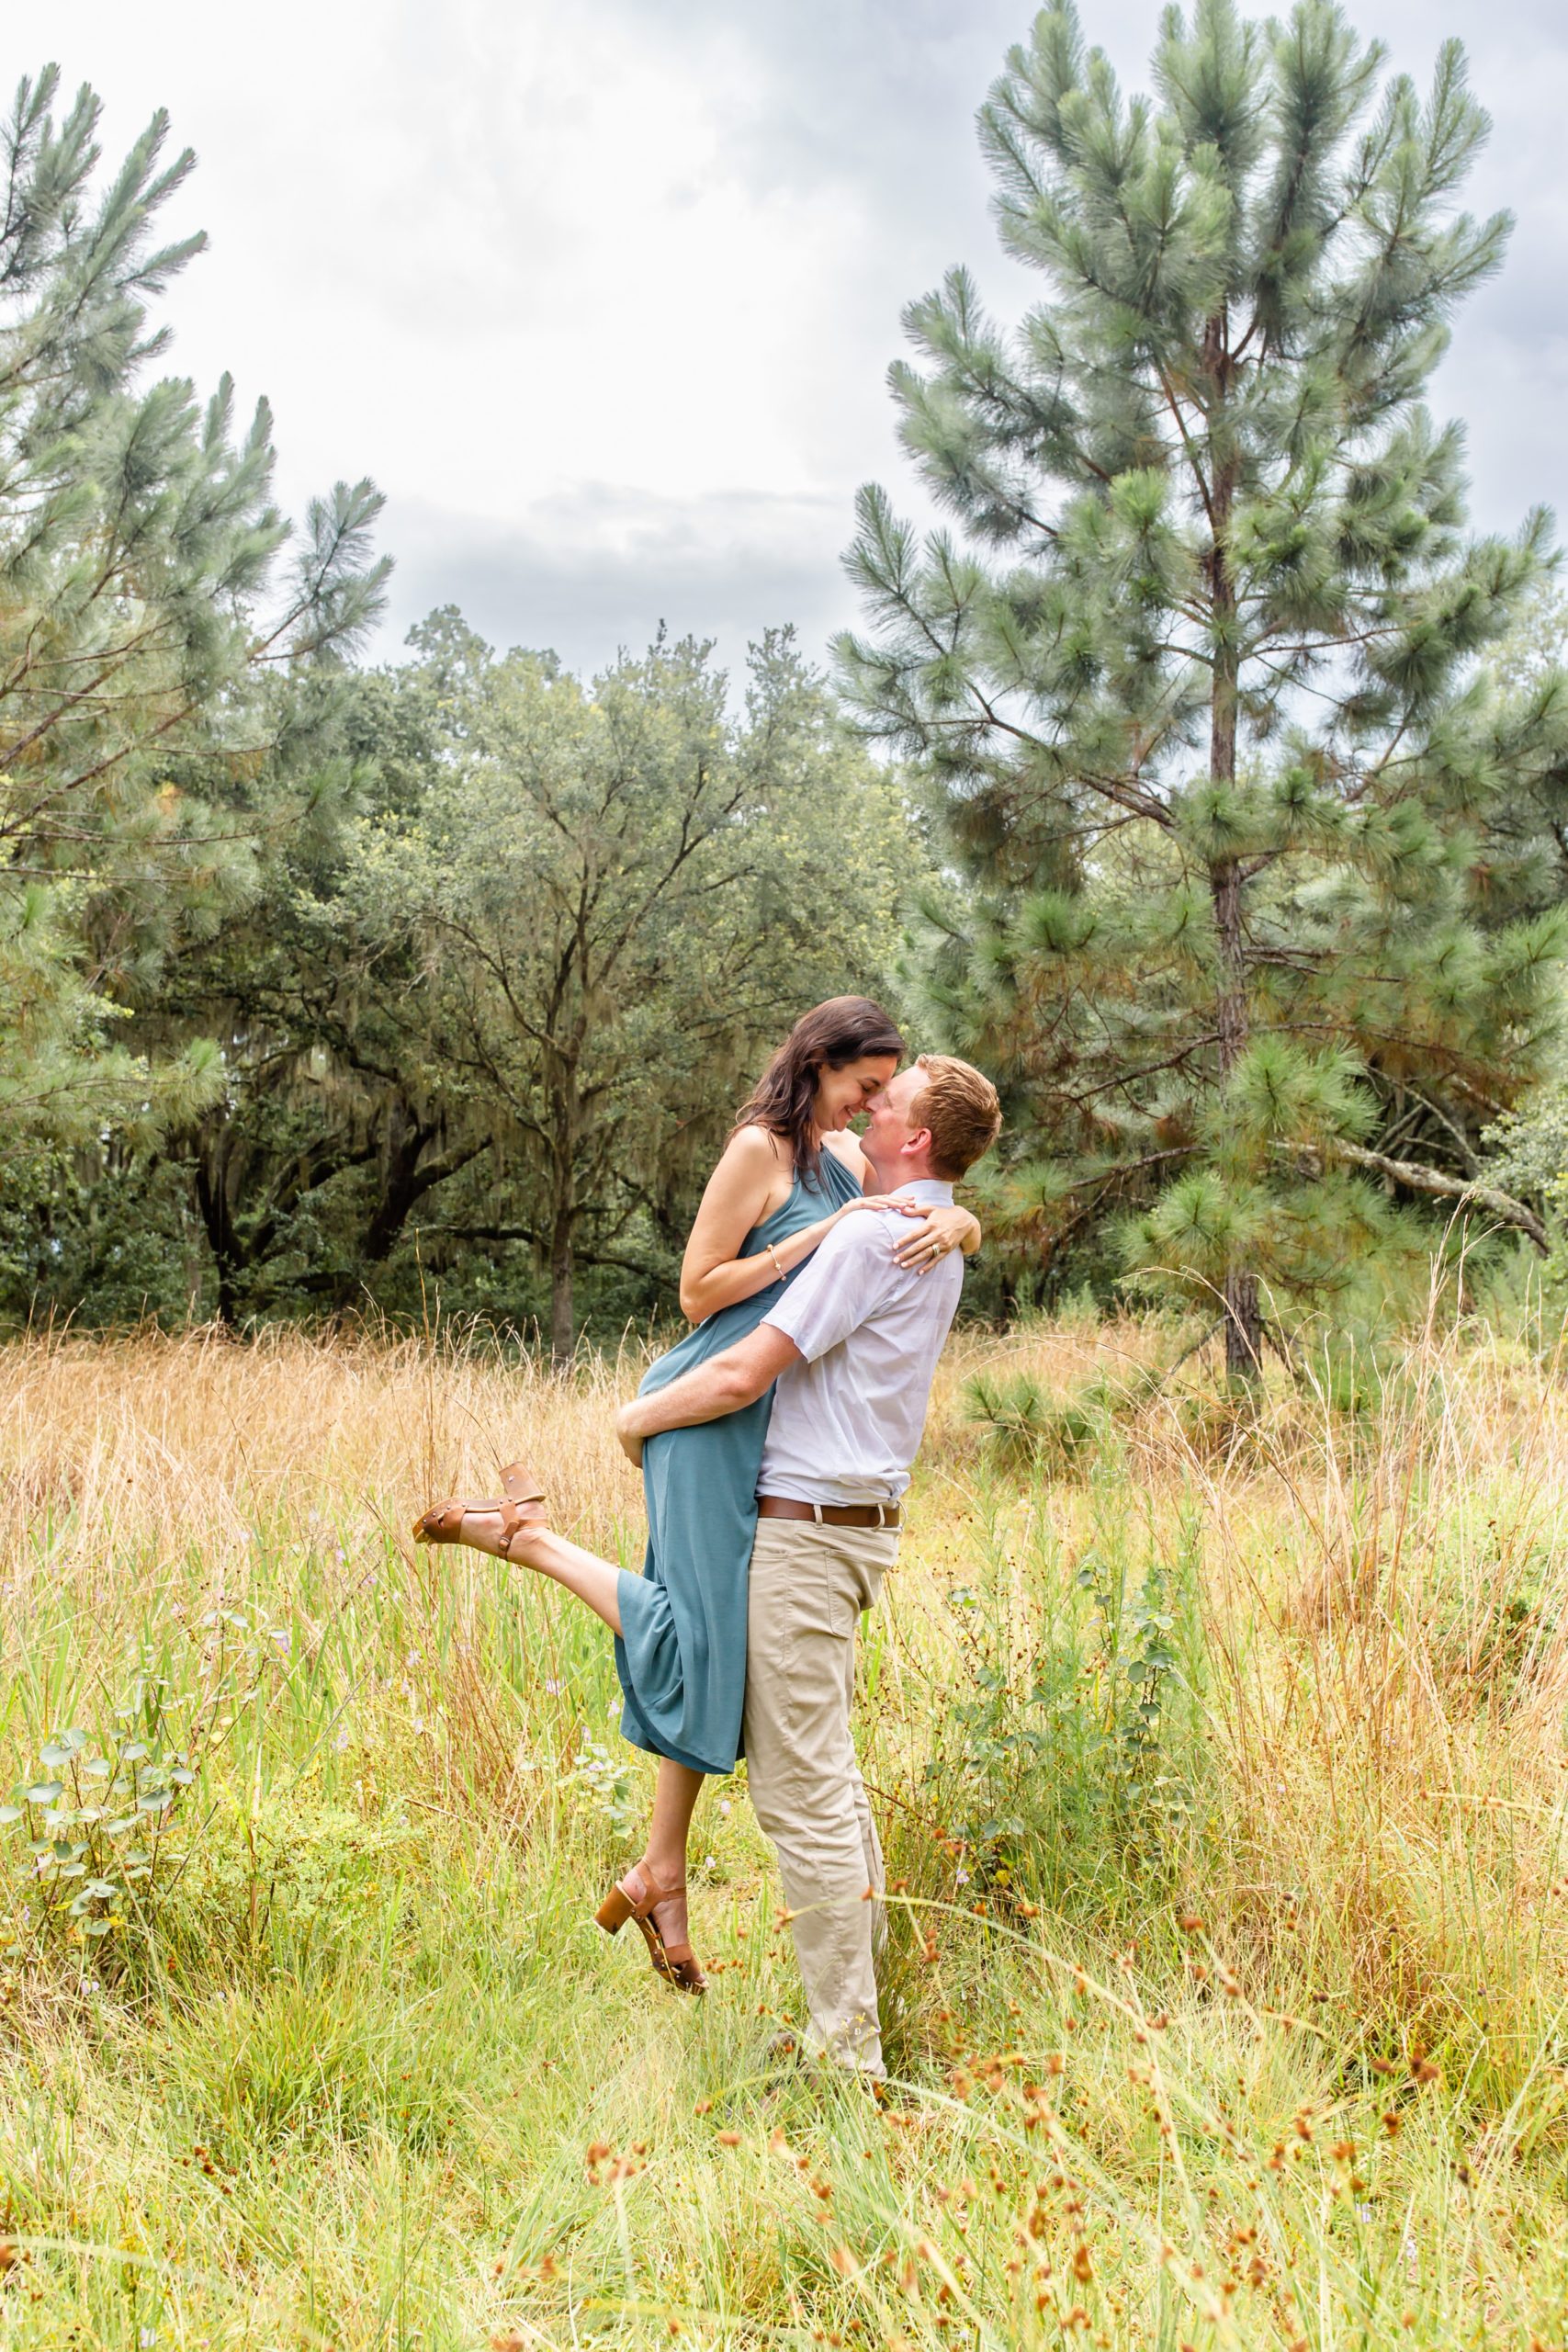 Lake Runnymede Engagement Photo — Guy lifting girl in field